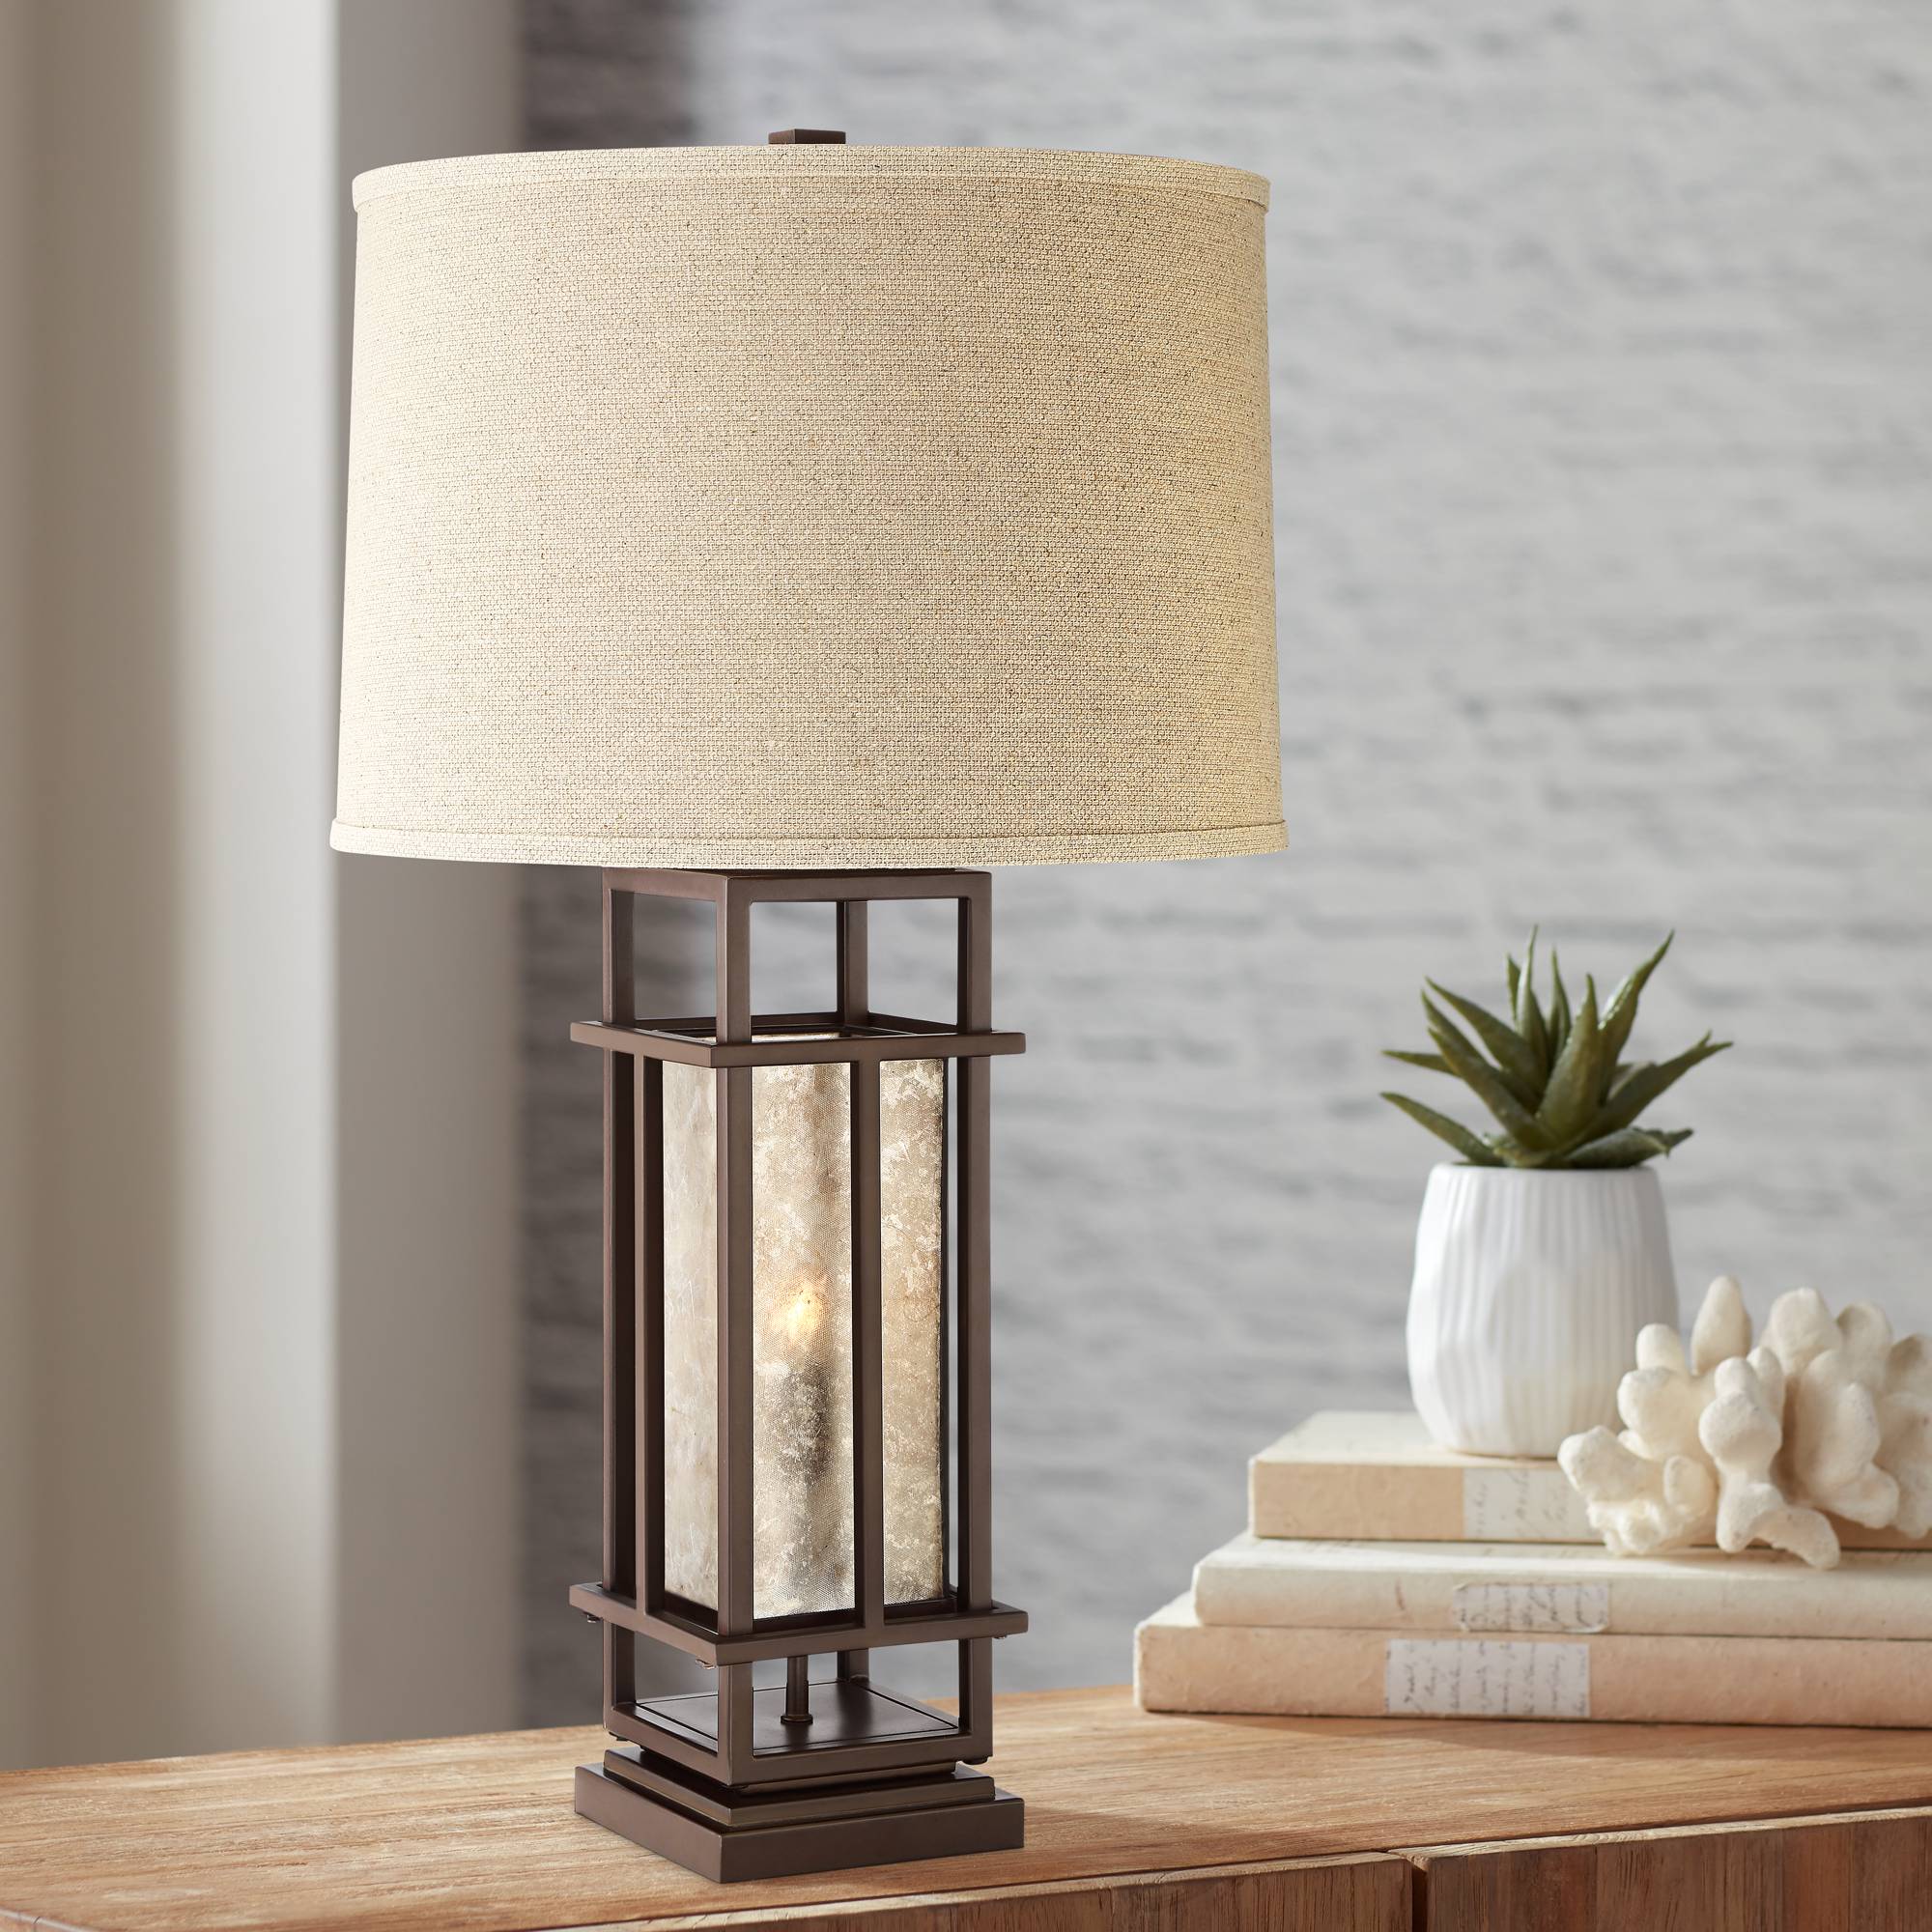 Country Style Table Lamps Living Room | Baci Living Room